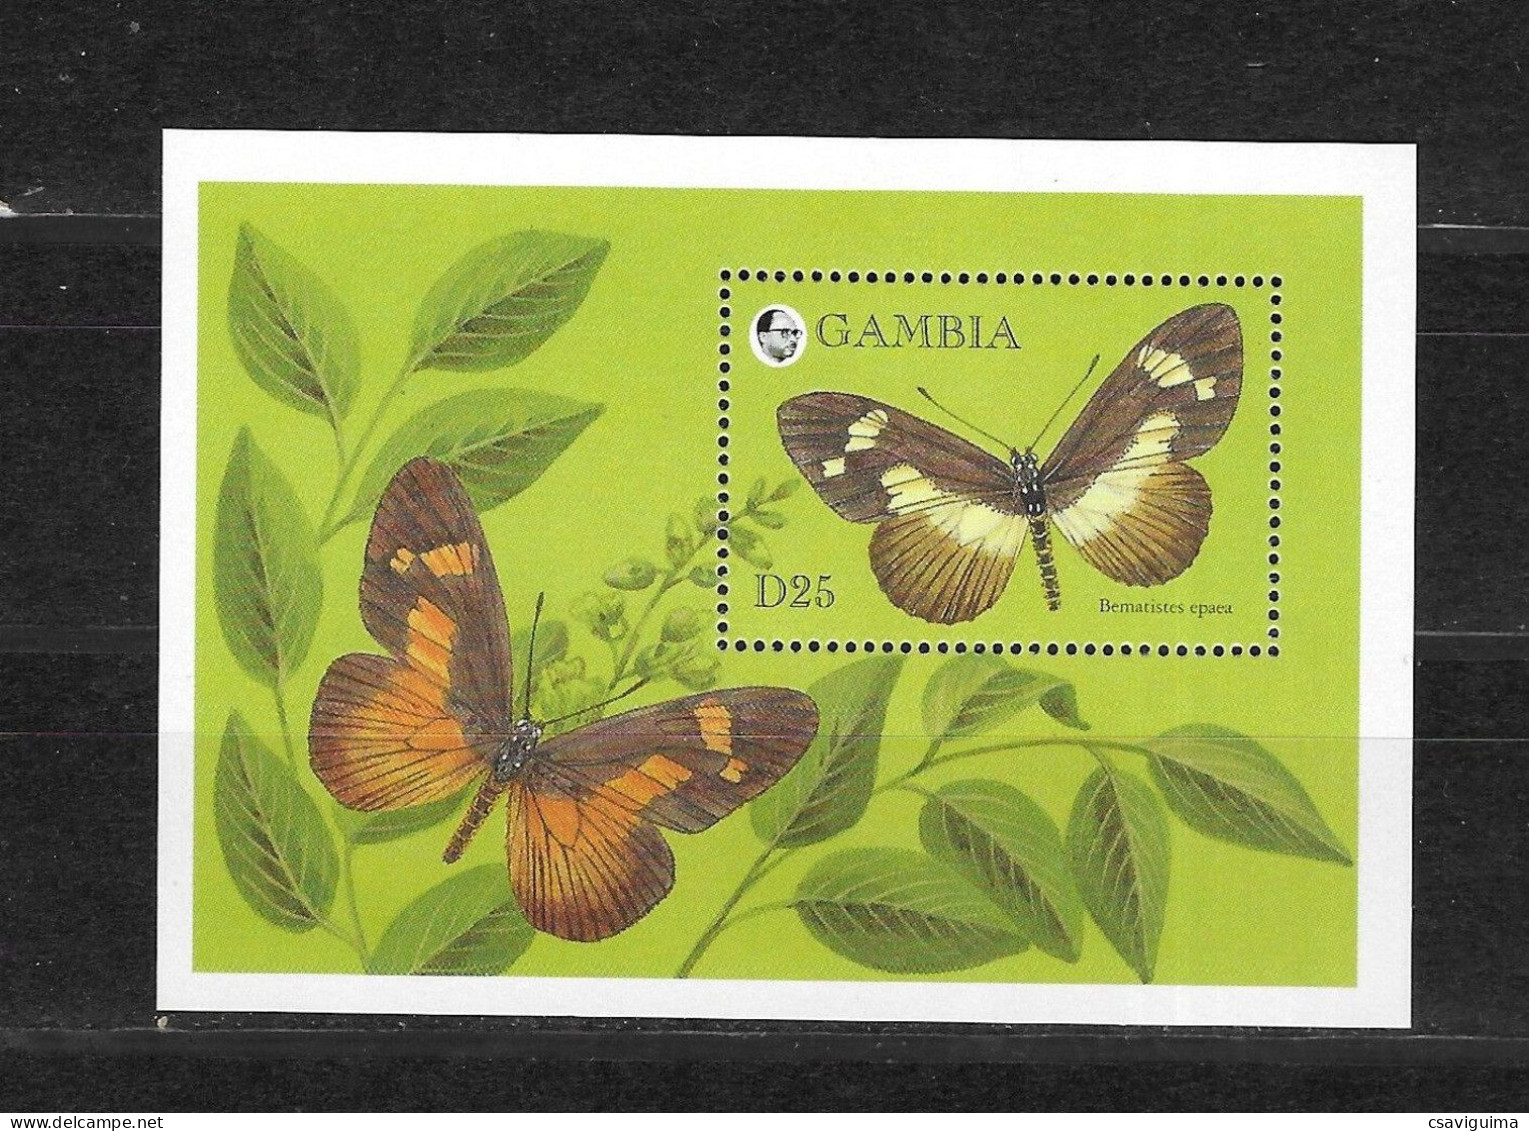 Gambia - 1994 - Insects: Butterflies - Yv Bf 236 - Butterflies